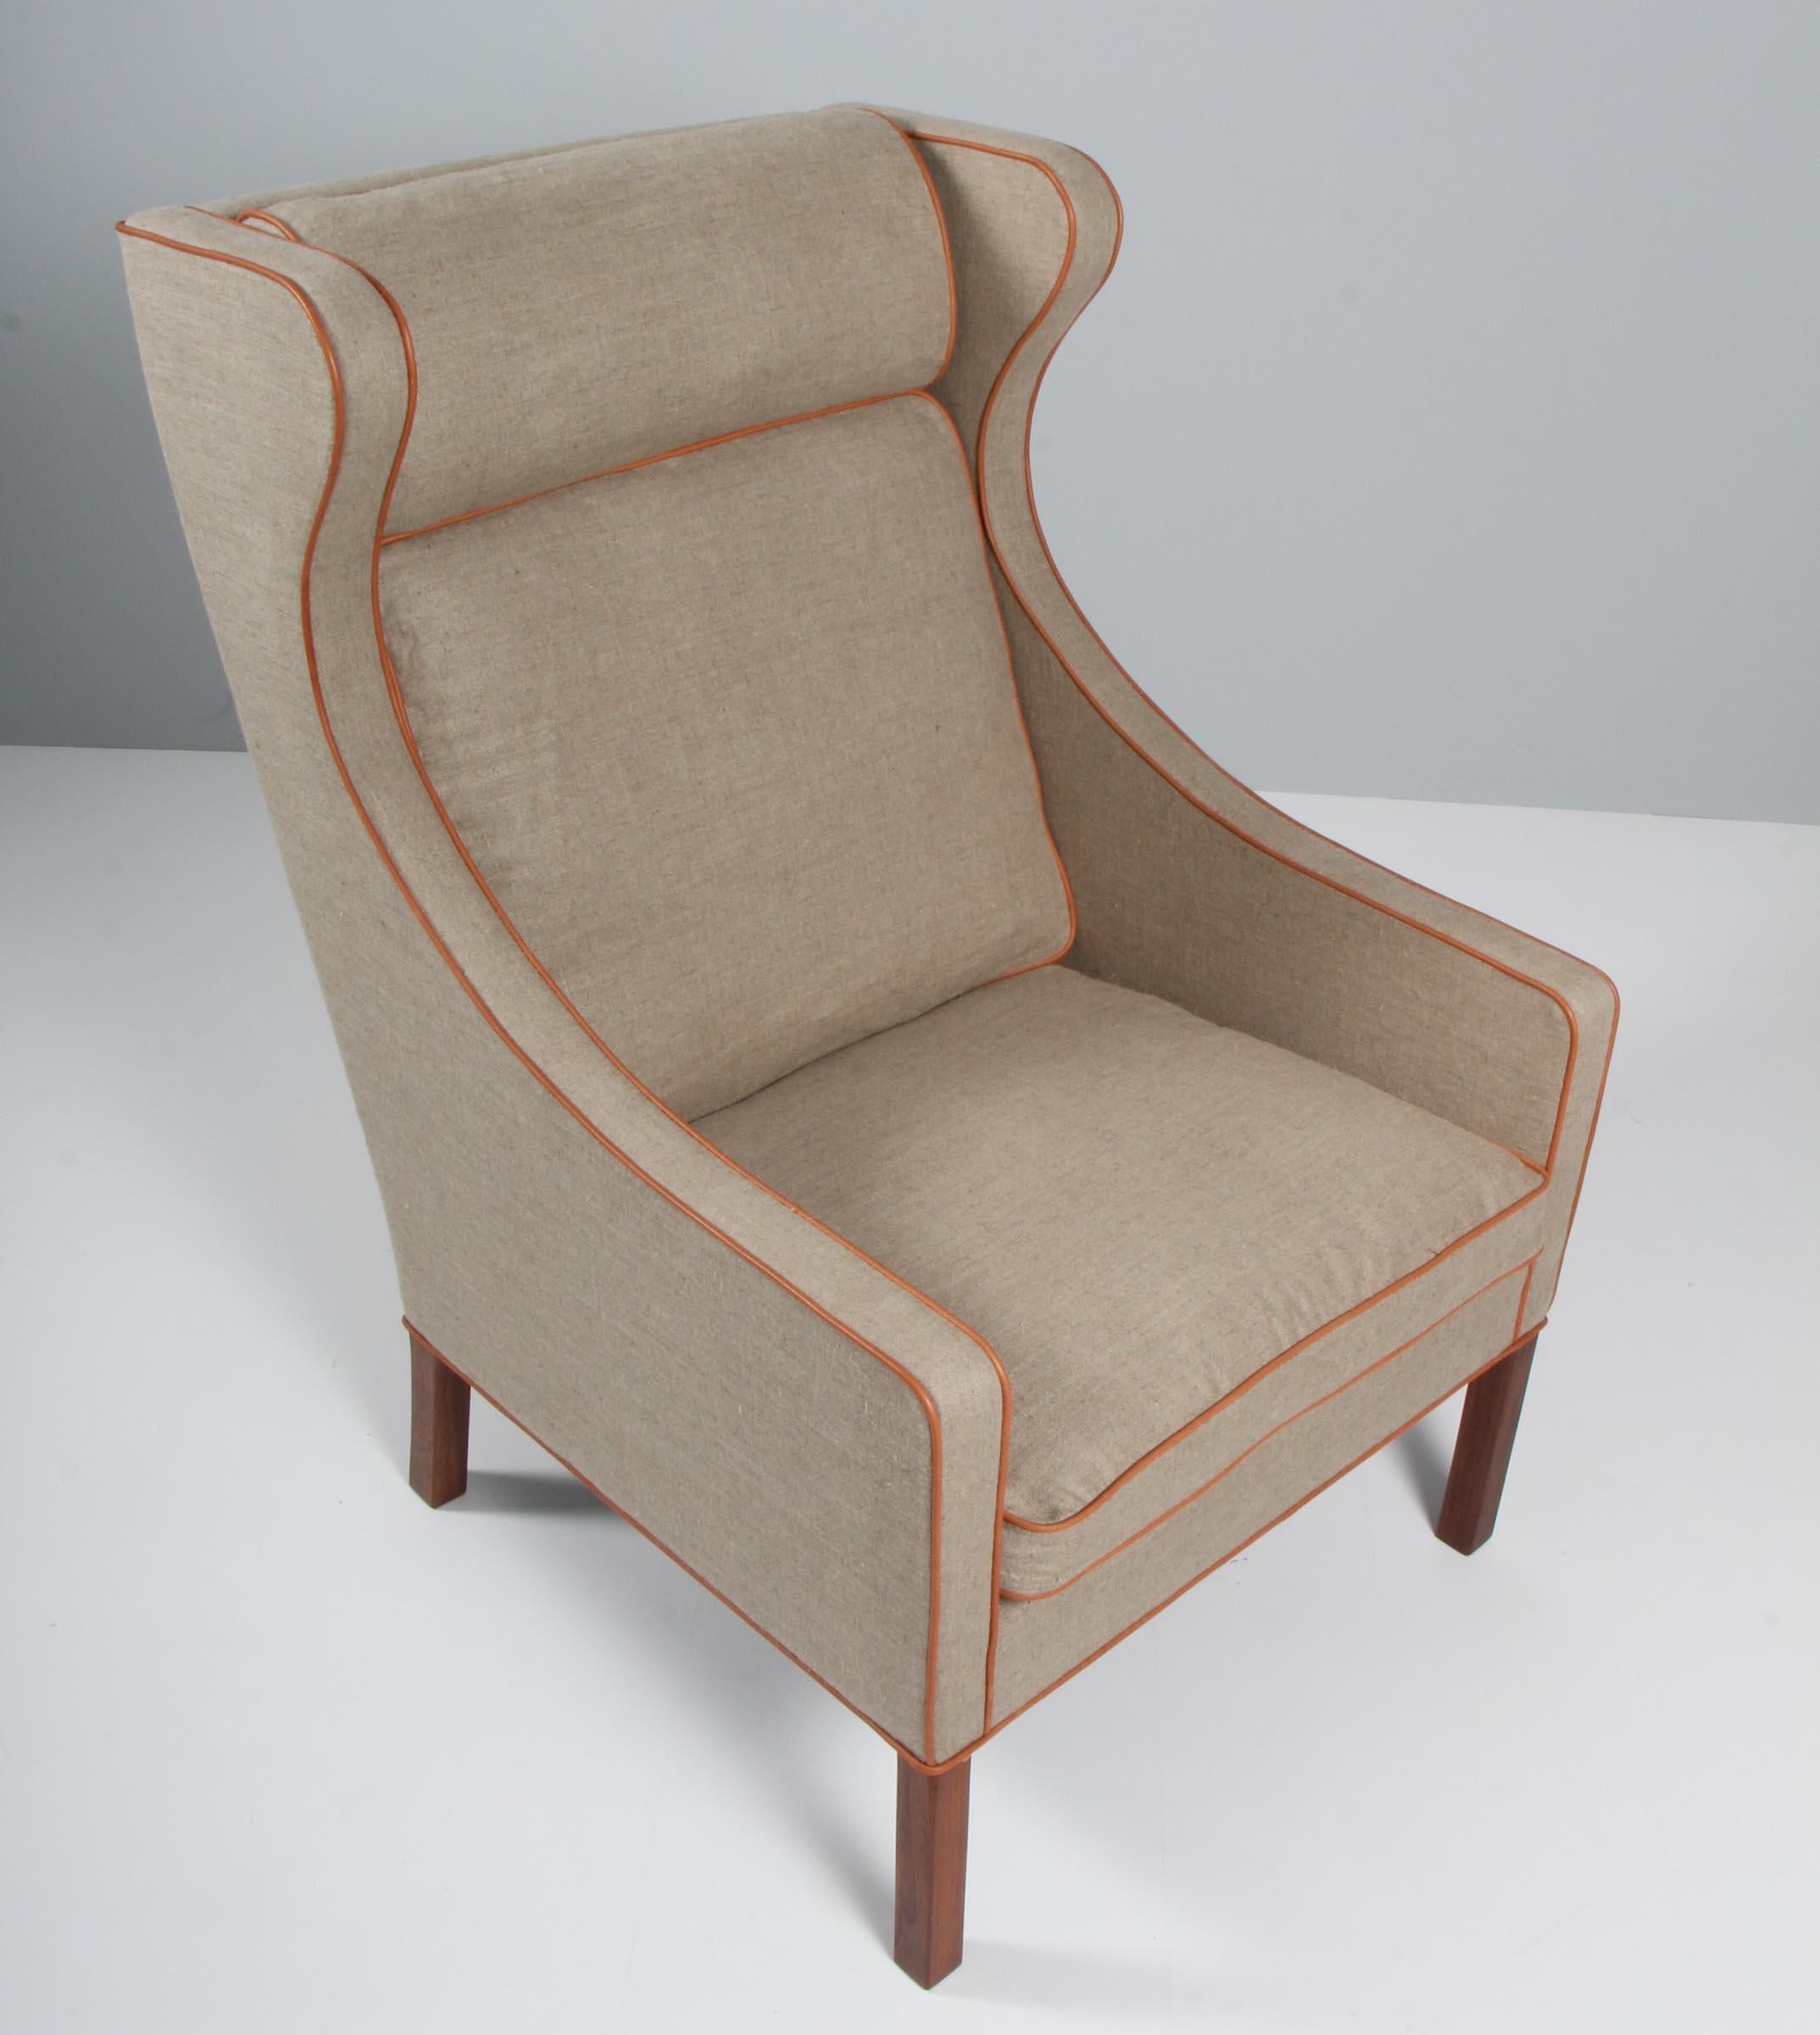 Børge Mogensen wingback chair new upholstered with canvas and cognac aniline tubings.

Legs in teak.

Model 2204, made by Fredericia Furniture.